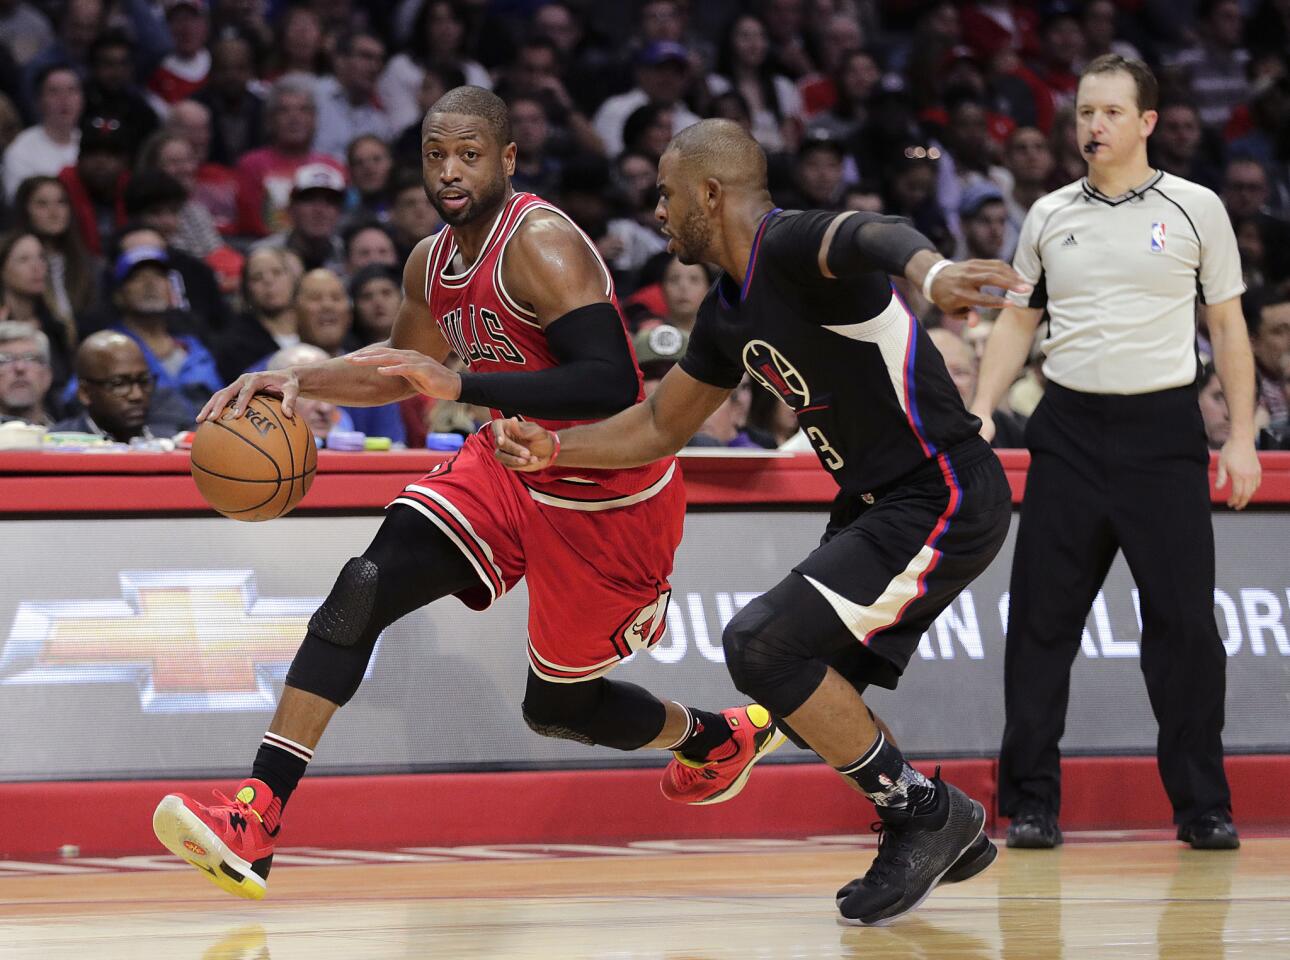 Clippers point gurad Chris Paul tries to cut off a drive by Bulls guard Dwyane Wade during the second half Saturday.